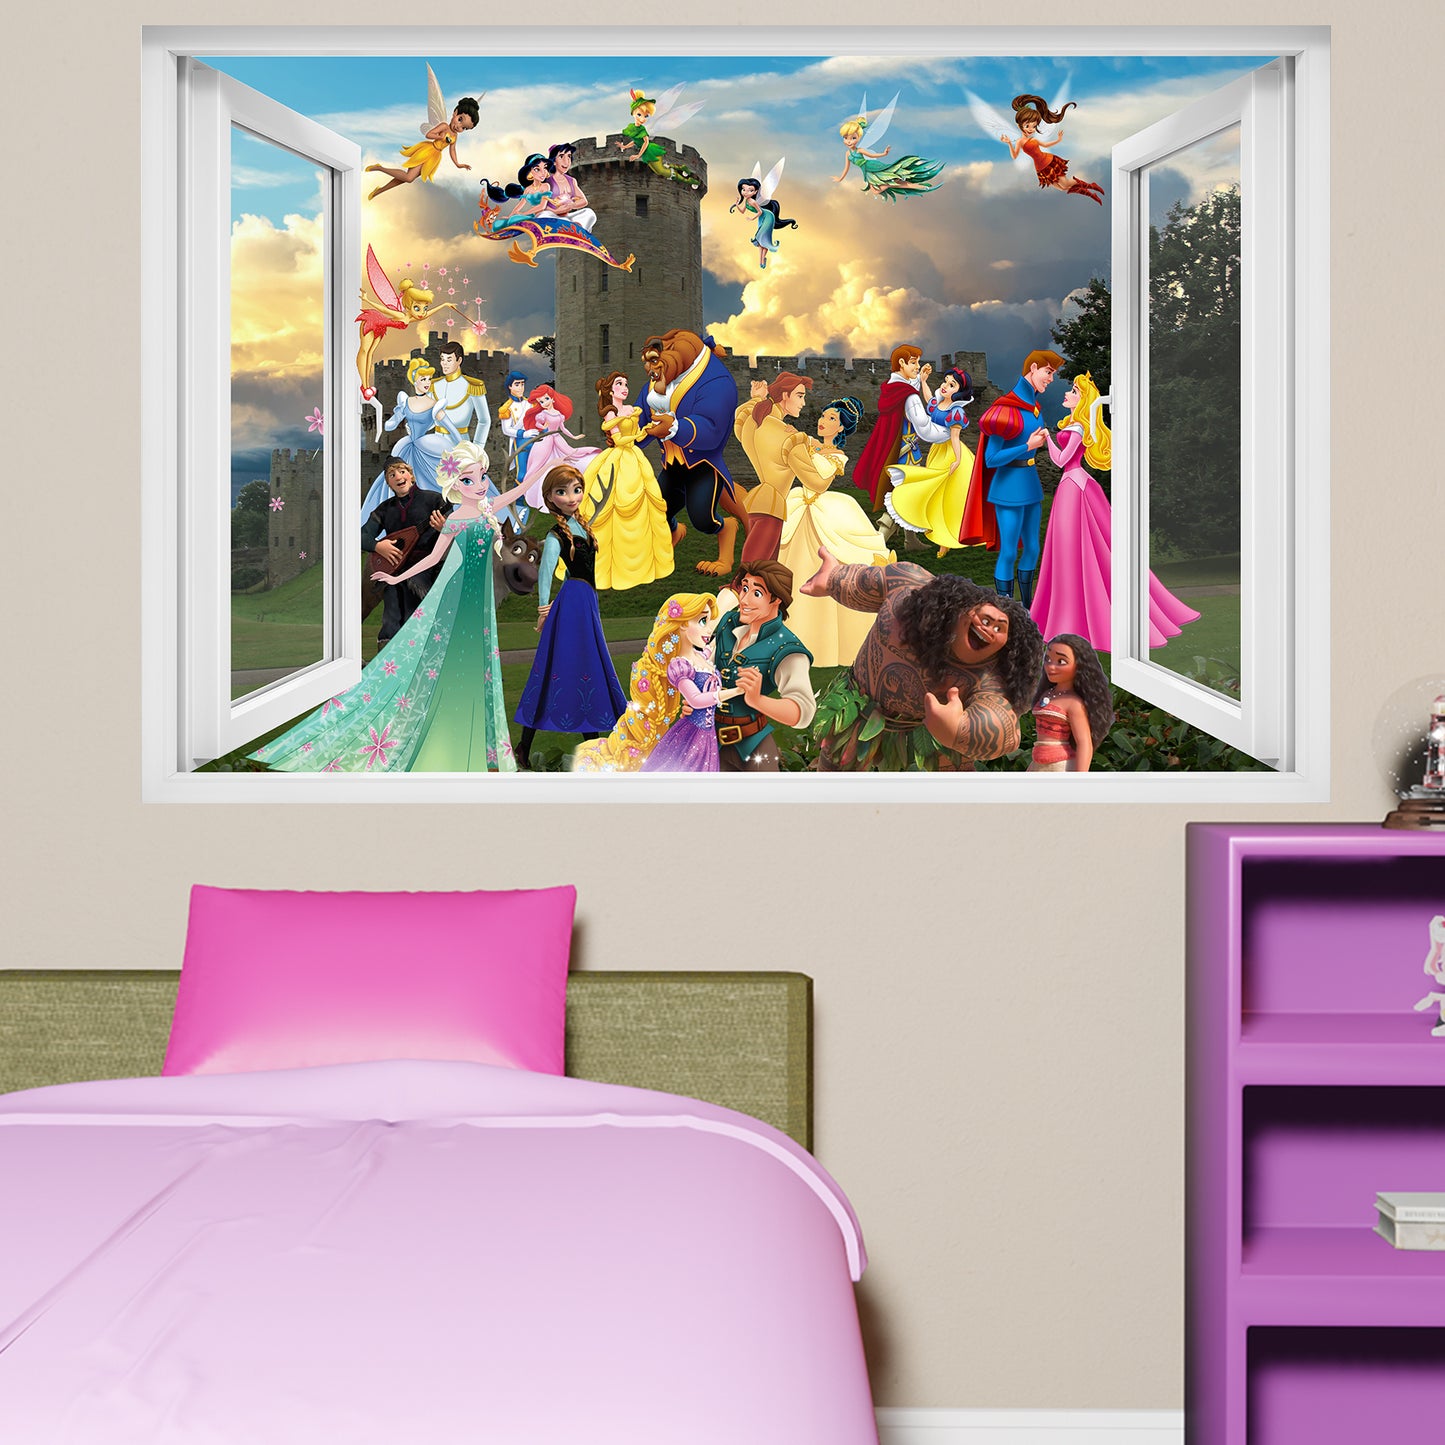 Castle Princess and Prince Characters Fairies Wall Sticker Art Poster Decal Mural  Nursery Bedroom Decor 1089